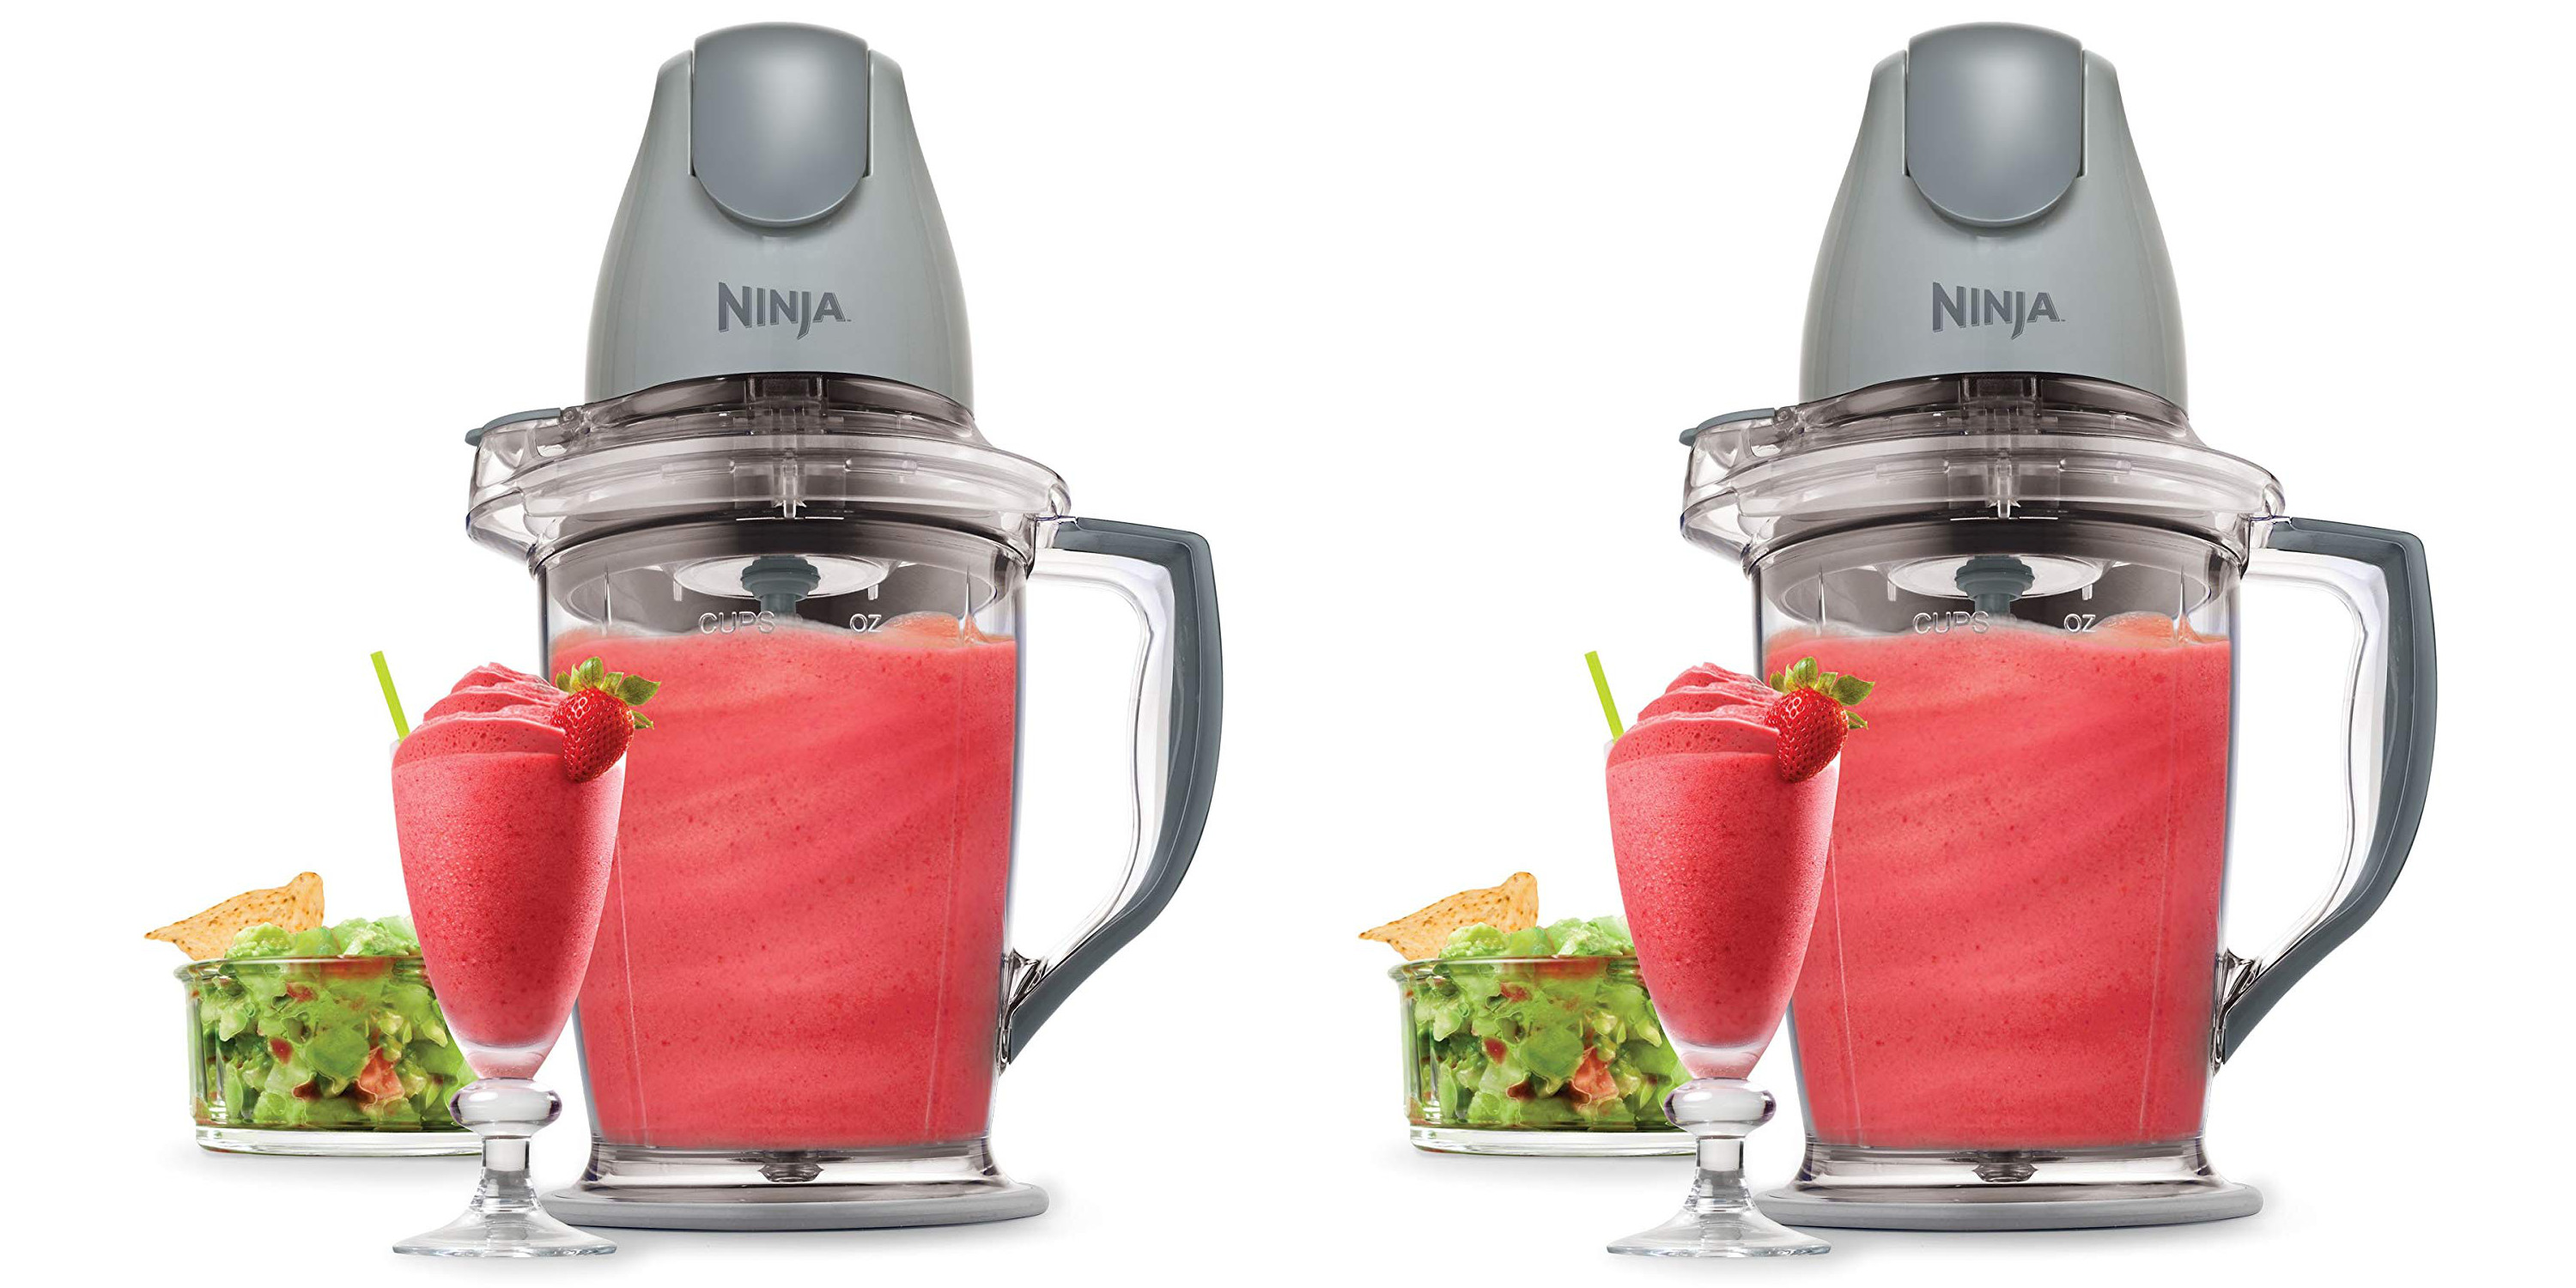 Replace your old smoothie blender w/ this 400-Watt Ninja for $22